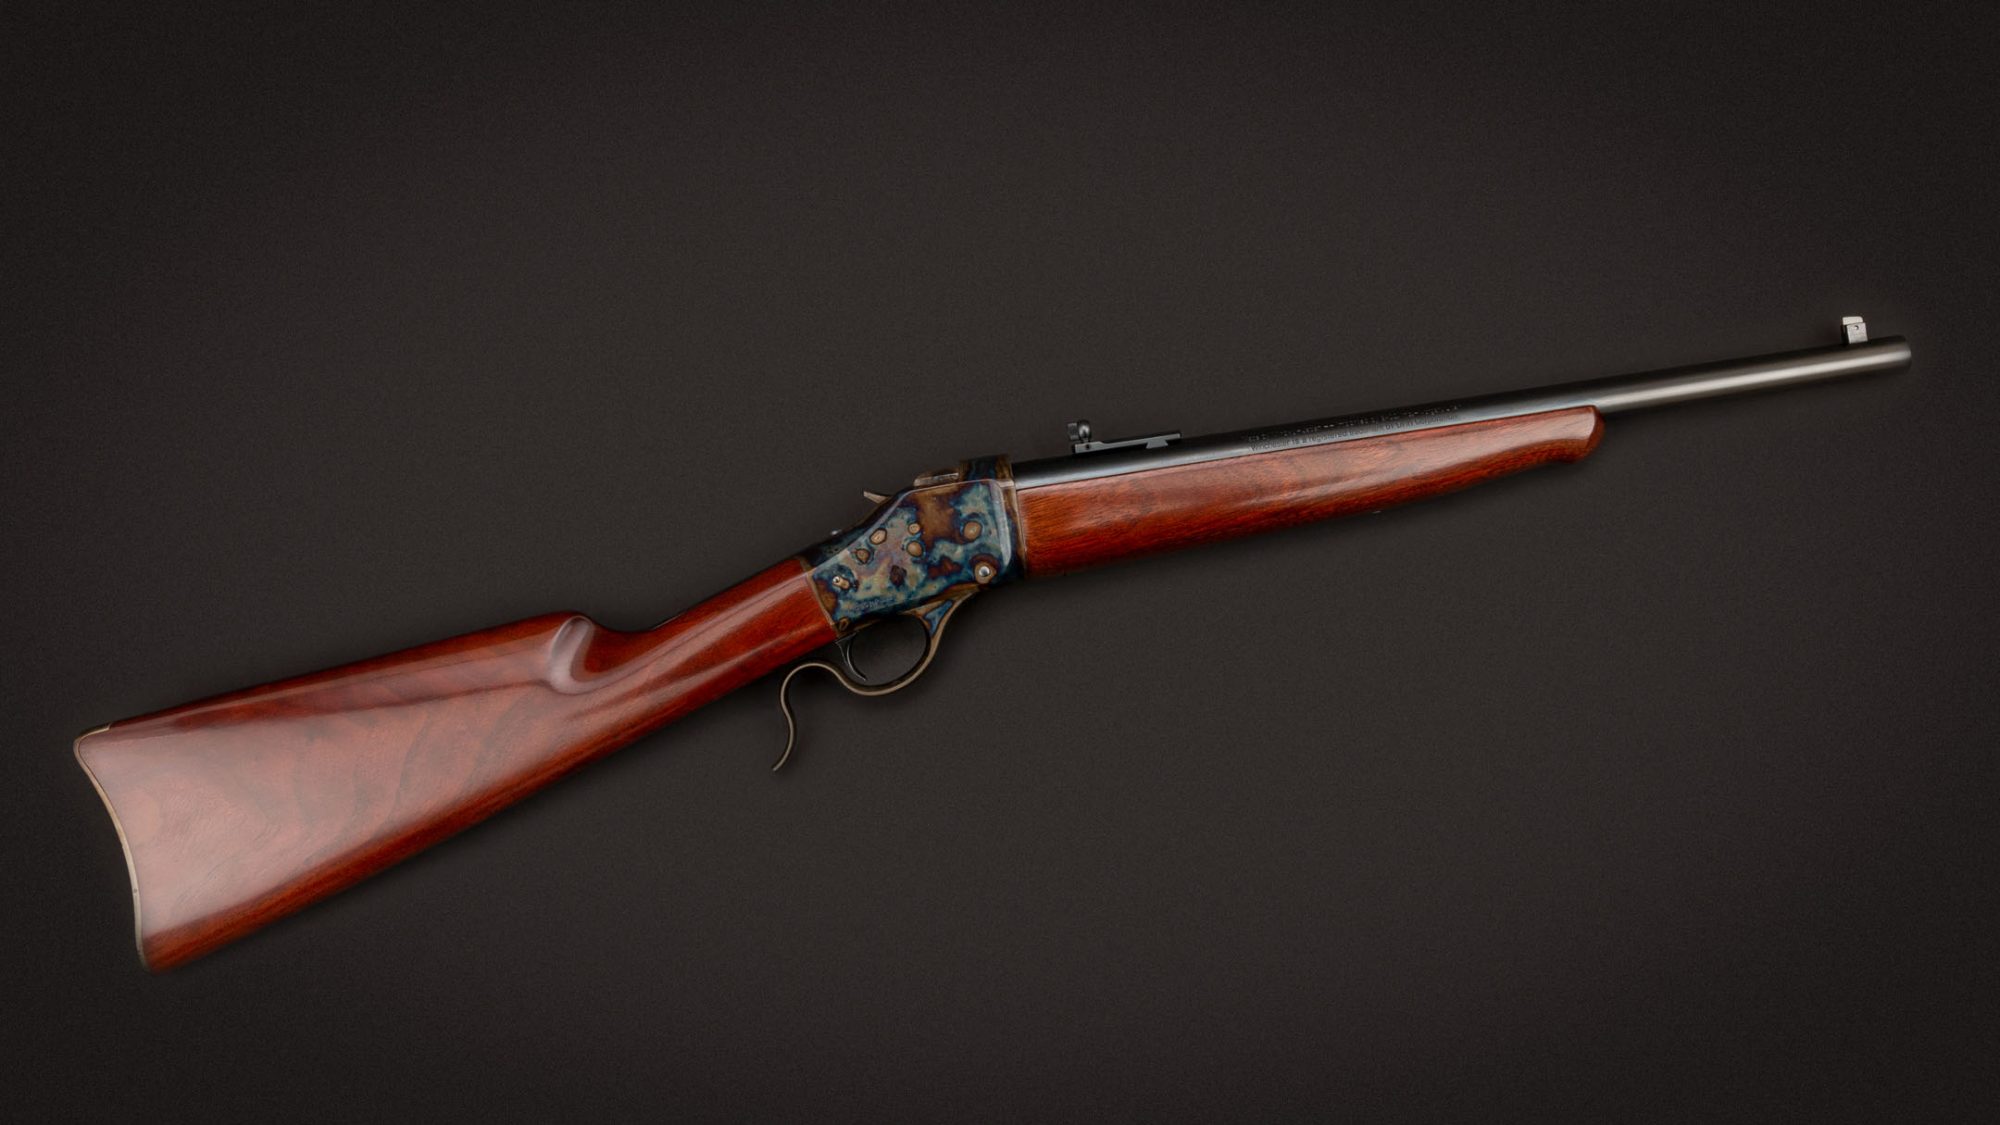 Winchester Model 1885 Trapper High Wall in .30-40 Krag featuring Turnbull metal and wood finishes, for sale by Turnbull Restoration Co. of Bloomfield, NY